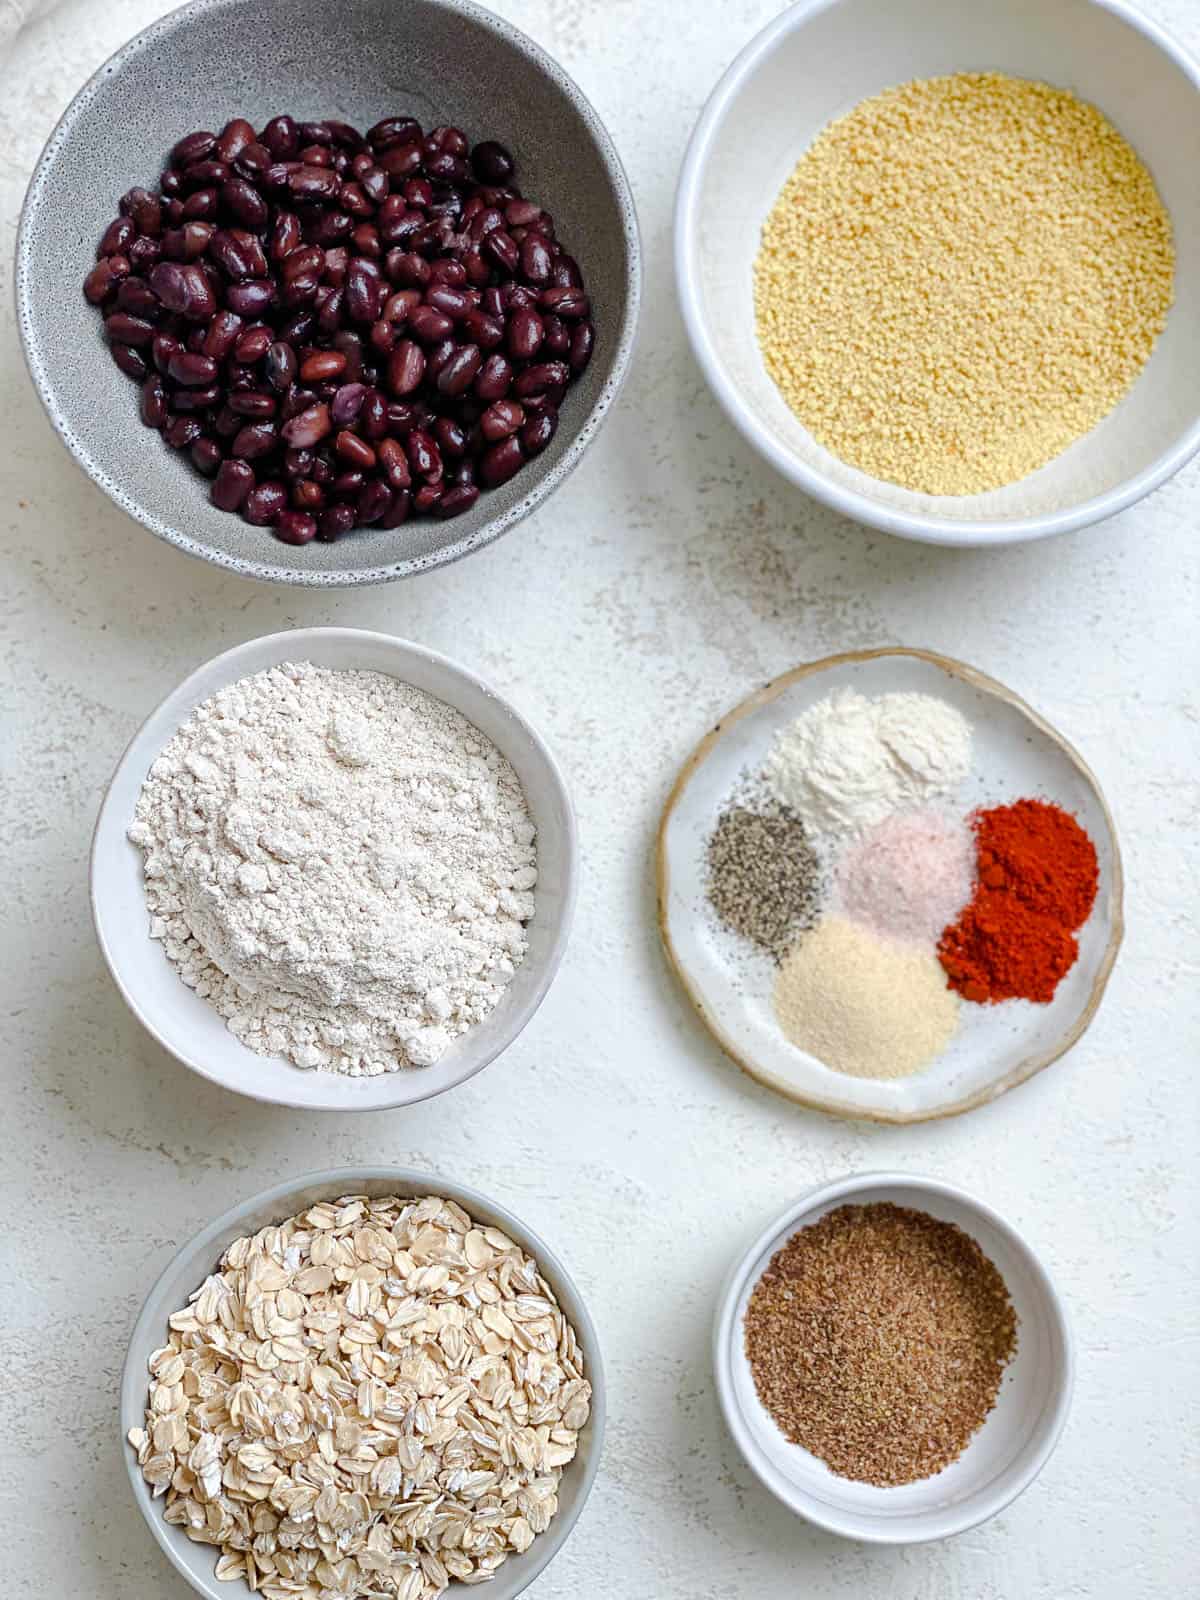 ingredients for Easy Black Bean Meatballs measured out against a white surface